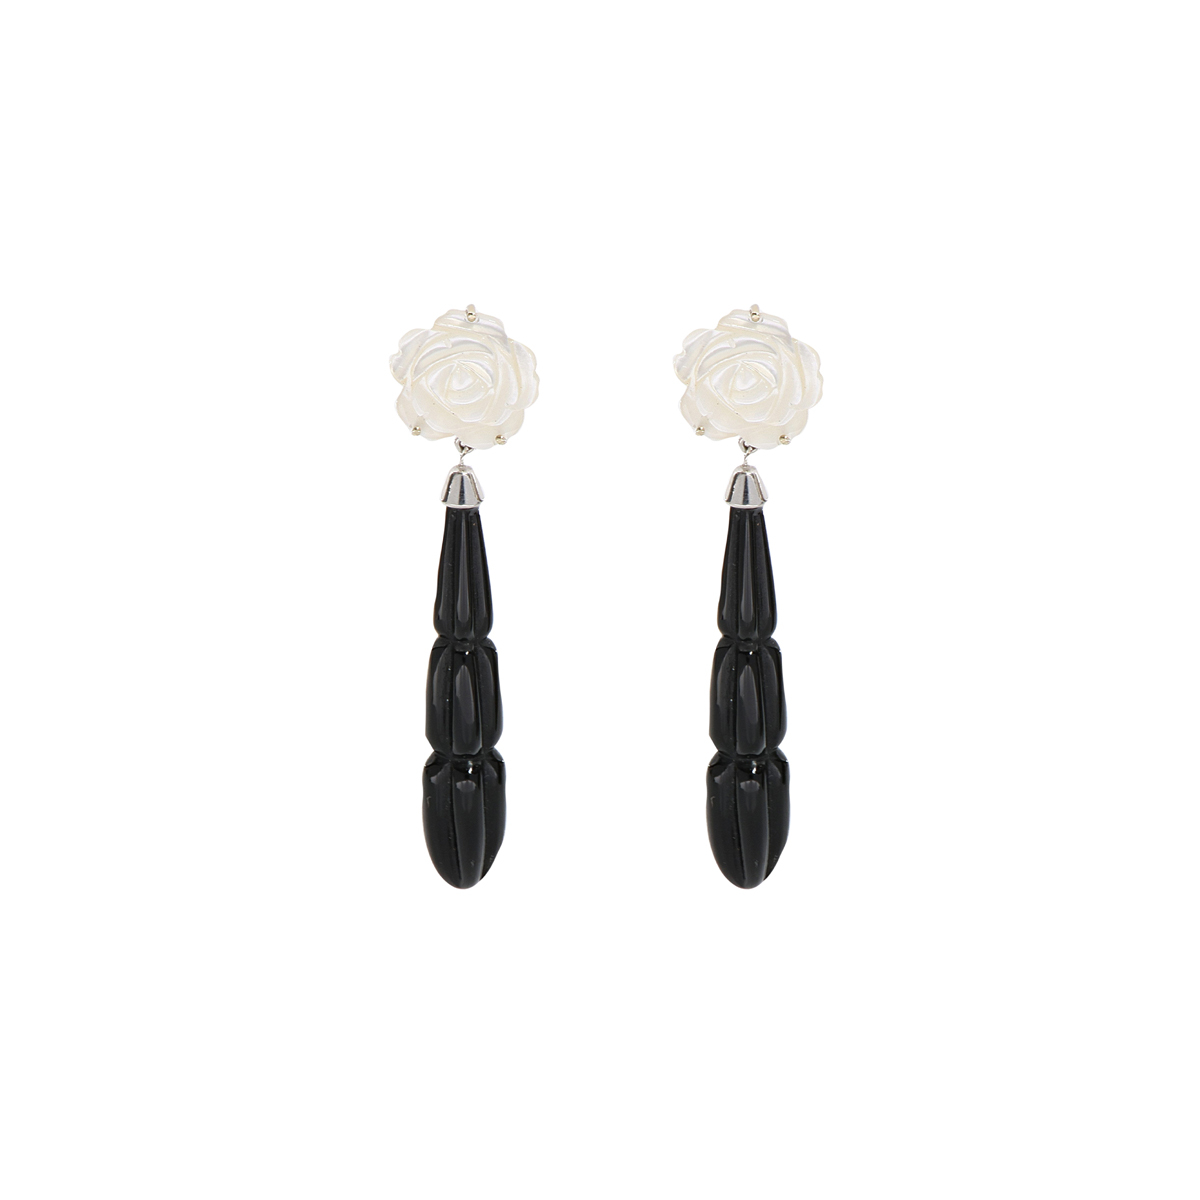 Onyx and mother-of-pearl earrings